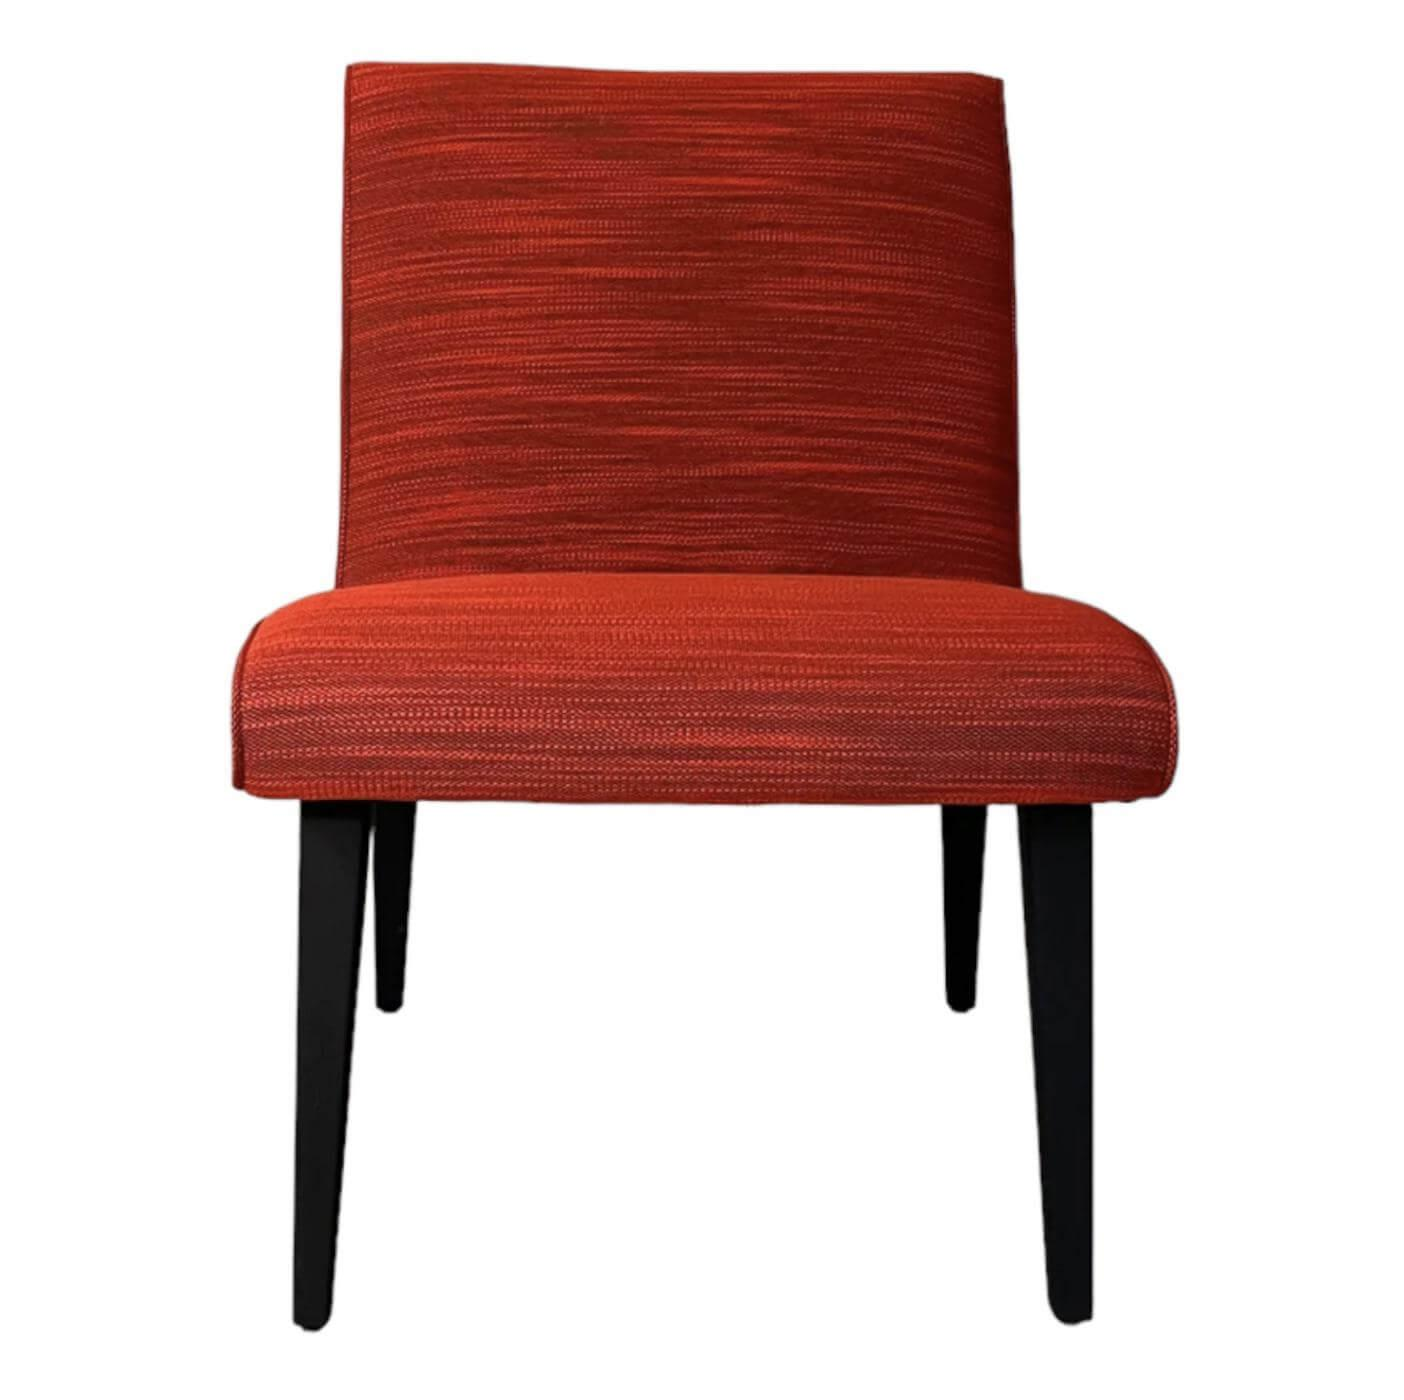 Sessel Vostra Wood 67-10 Walter Knoll Stoff Lila Farbe Rot Gestell Massivholz Eiche